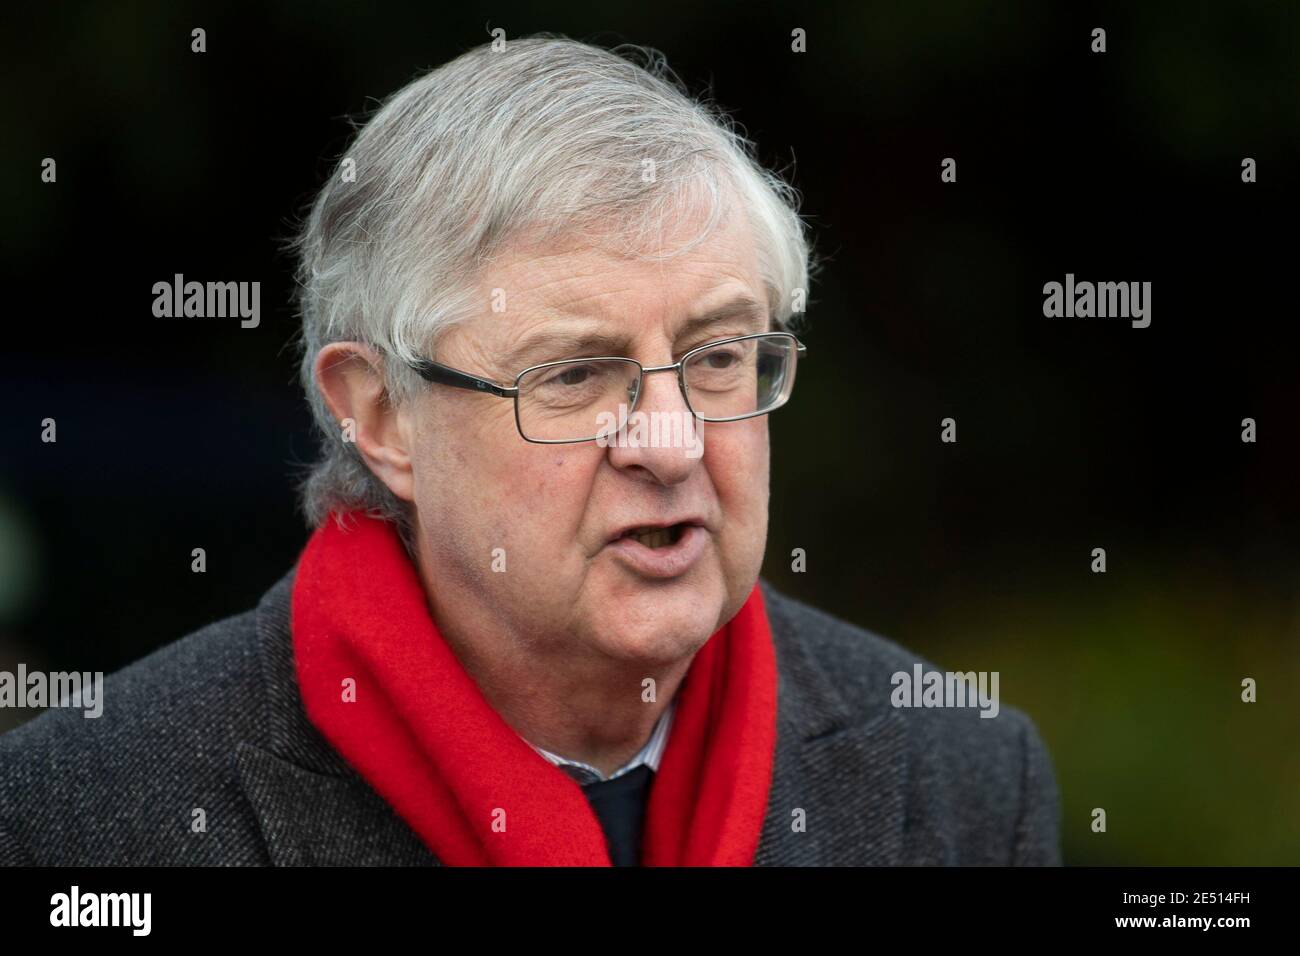 NEATH PORT TALBOT, WALES - JANUARY 24: First Minister of Wales Mark Drakeford on January 24, 2021 in Neath Port Talbot, Wales. Stock Photo